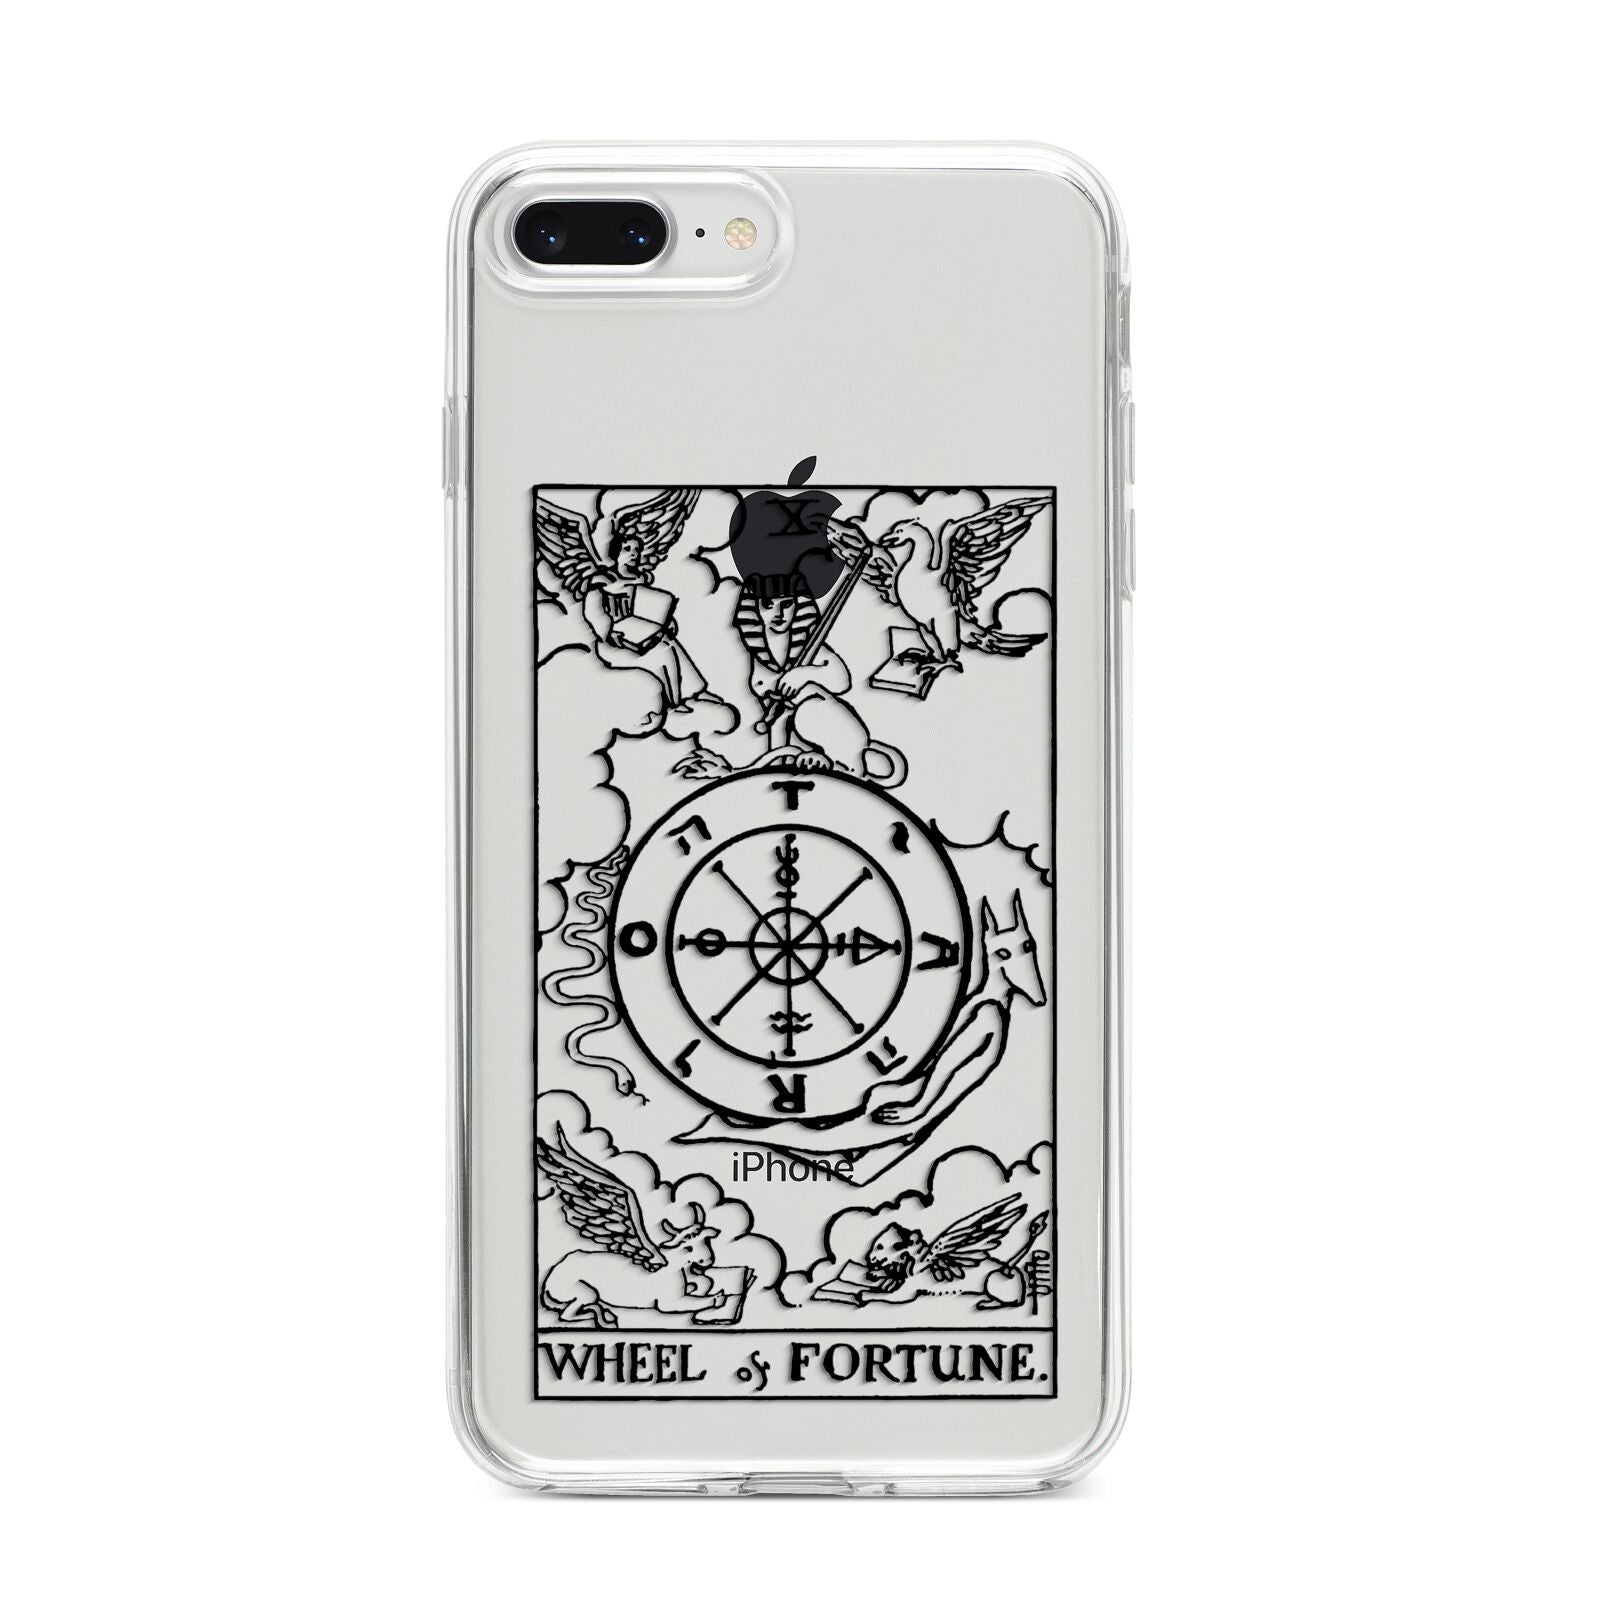 Wheel of Fortune Monochrome Tarot Card iPhone 8 Plus Bumper Case on Silver iPhone